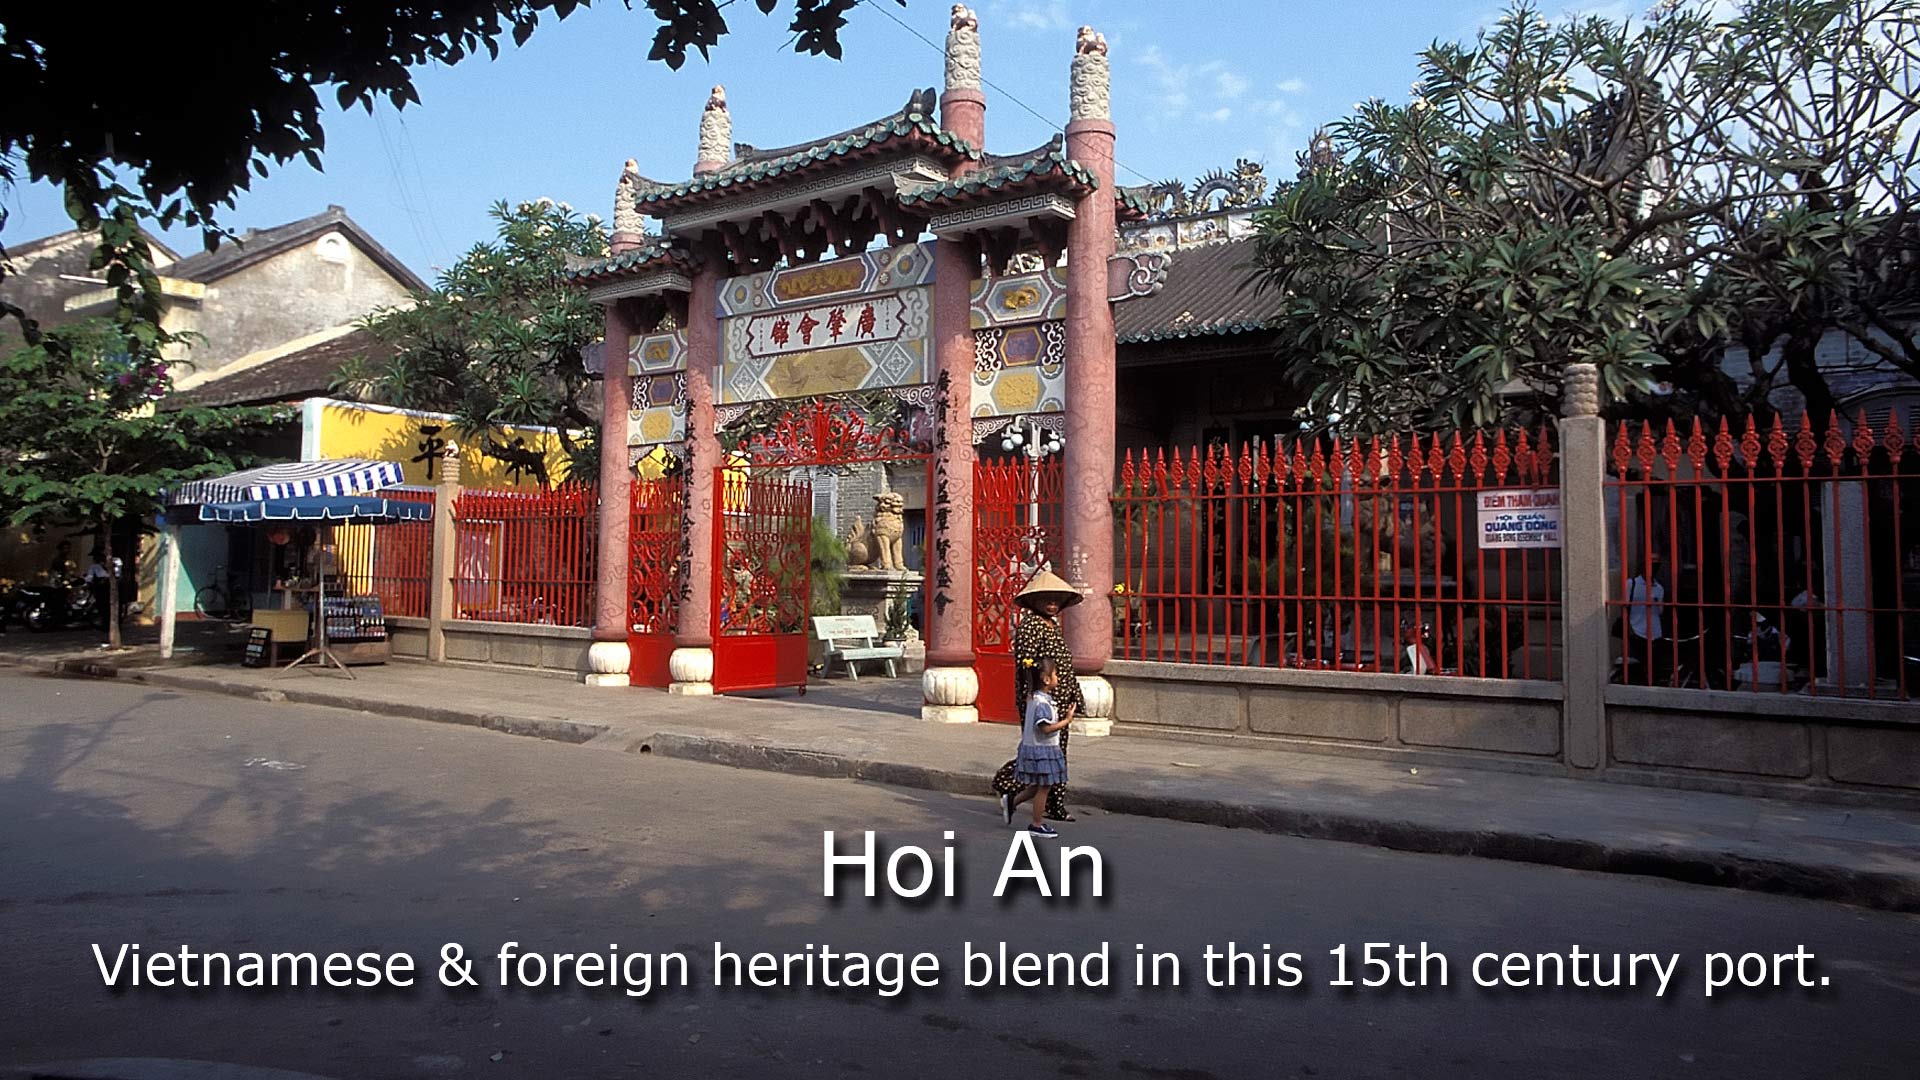 Hoi An - Vietnamese & foreign heritage blend in this 15th century port